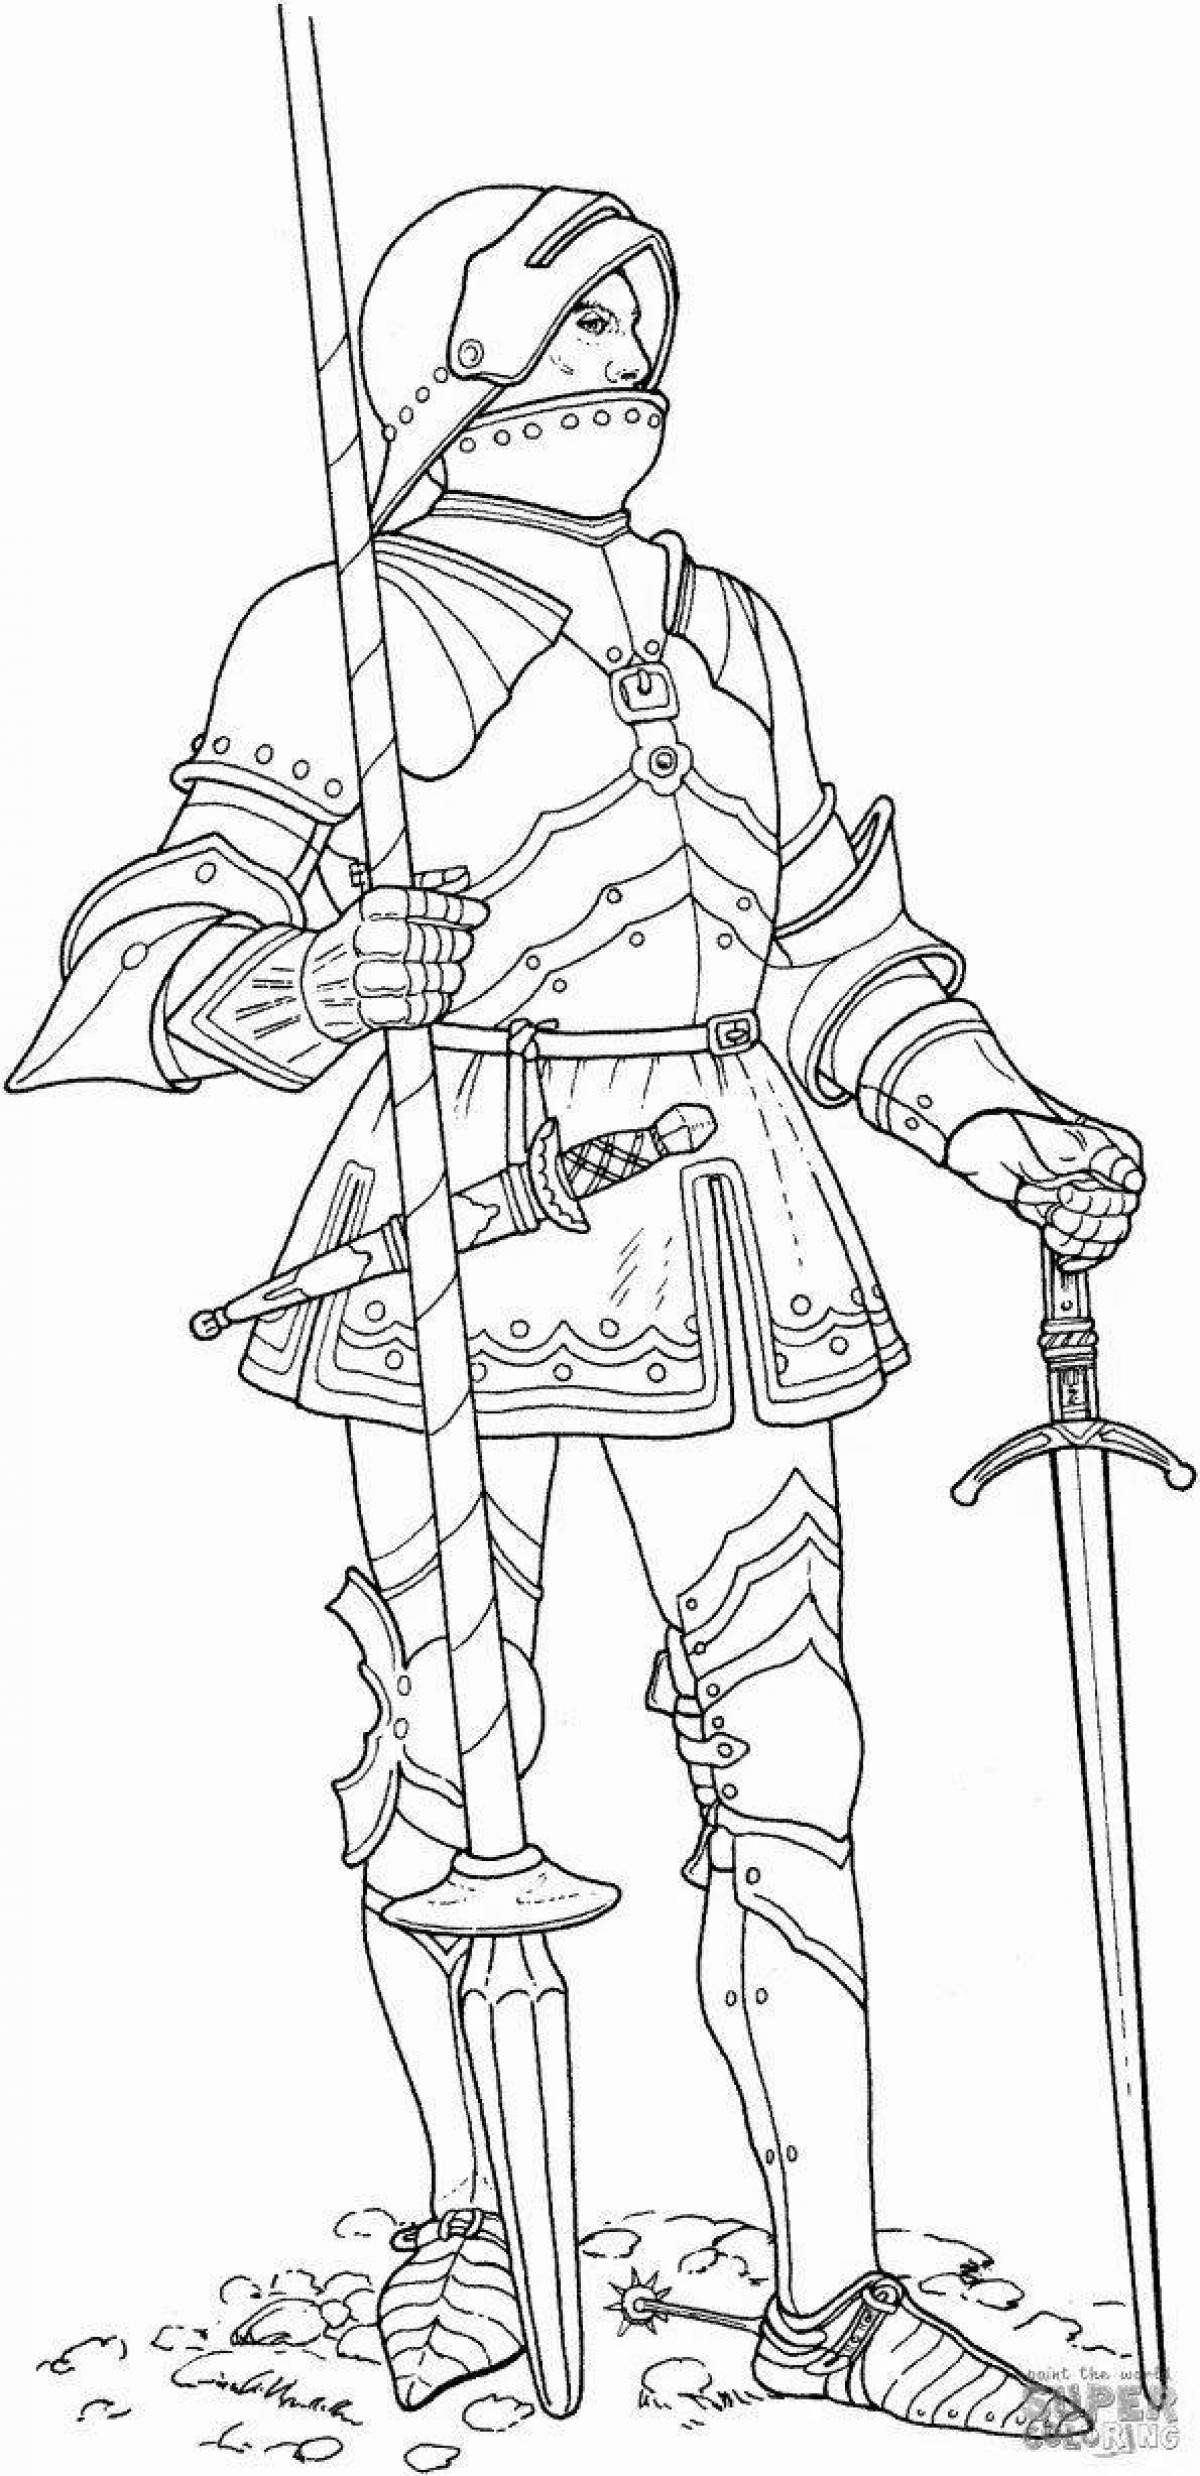 Unstoppable warrior coloring page